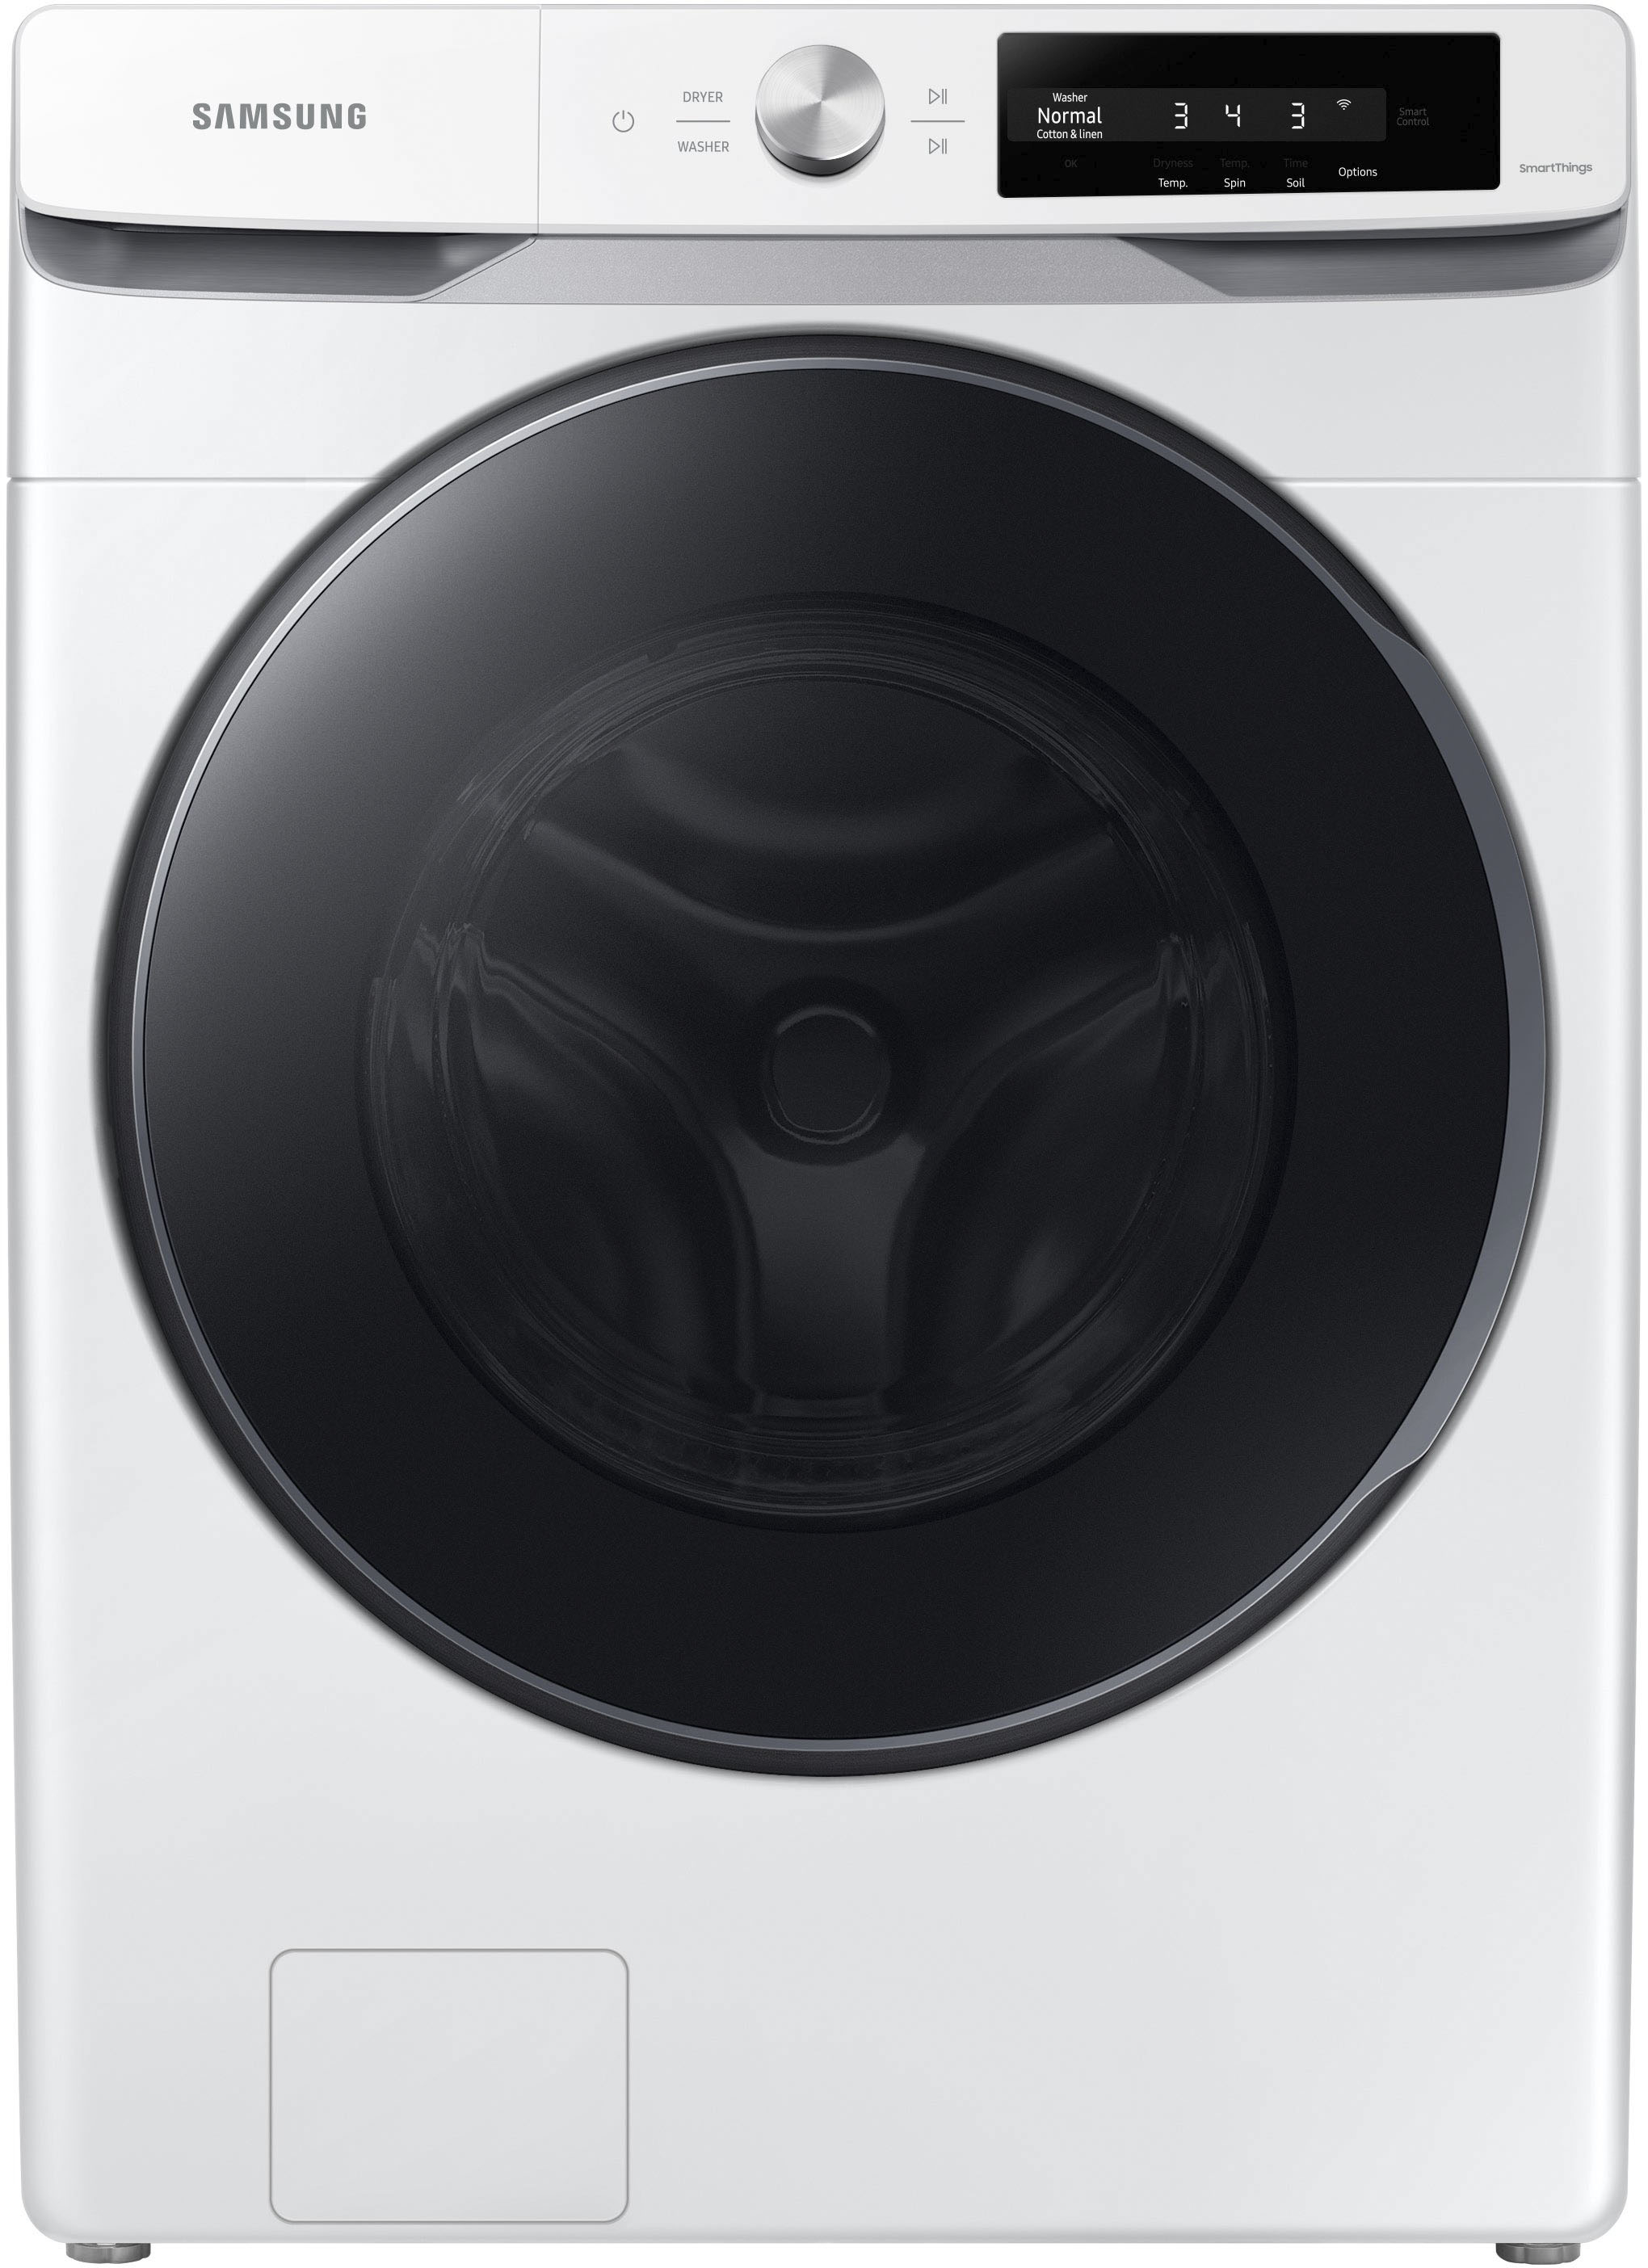 Samsung - 4.5 cu. ft. Large Capacity Smart Dial Front Load Washer with Super Speed Wash - White